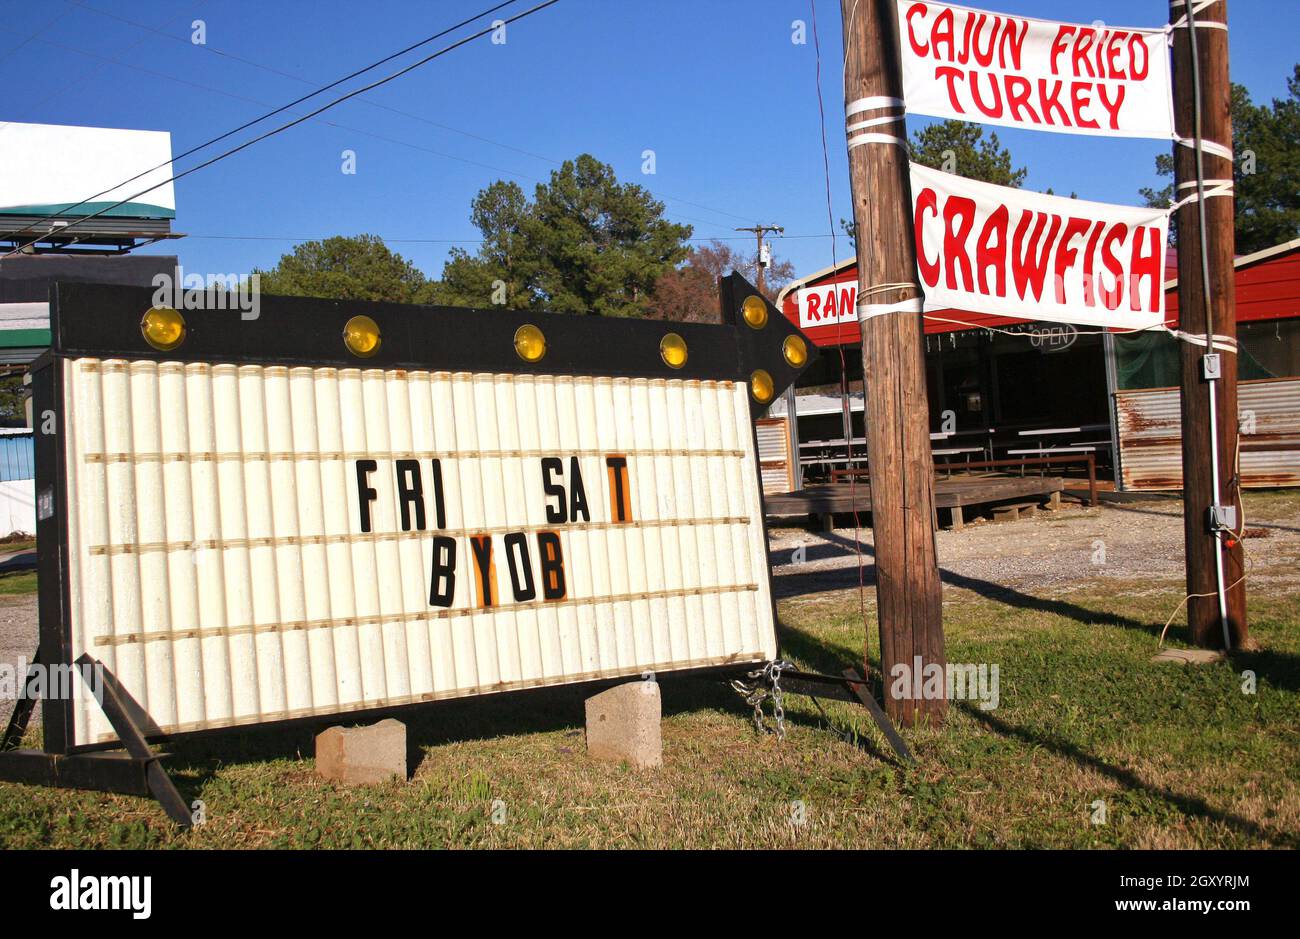 Cajun Fried Turkey and Crawfish Sign Rural Food Stand Stock Photo